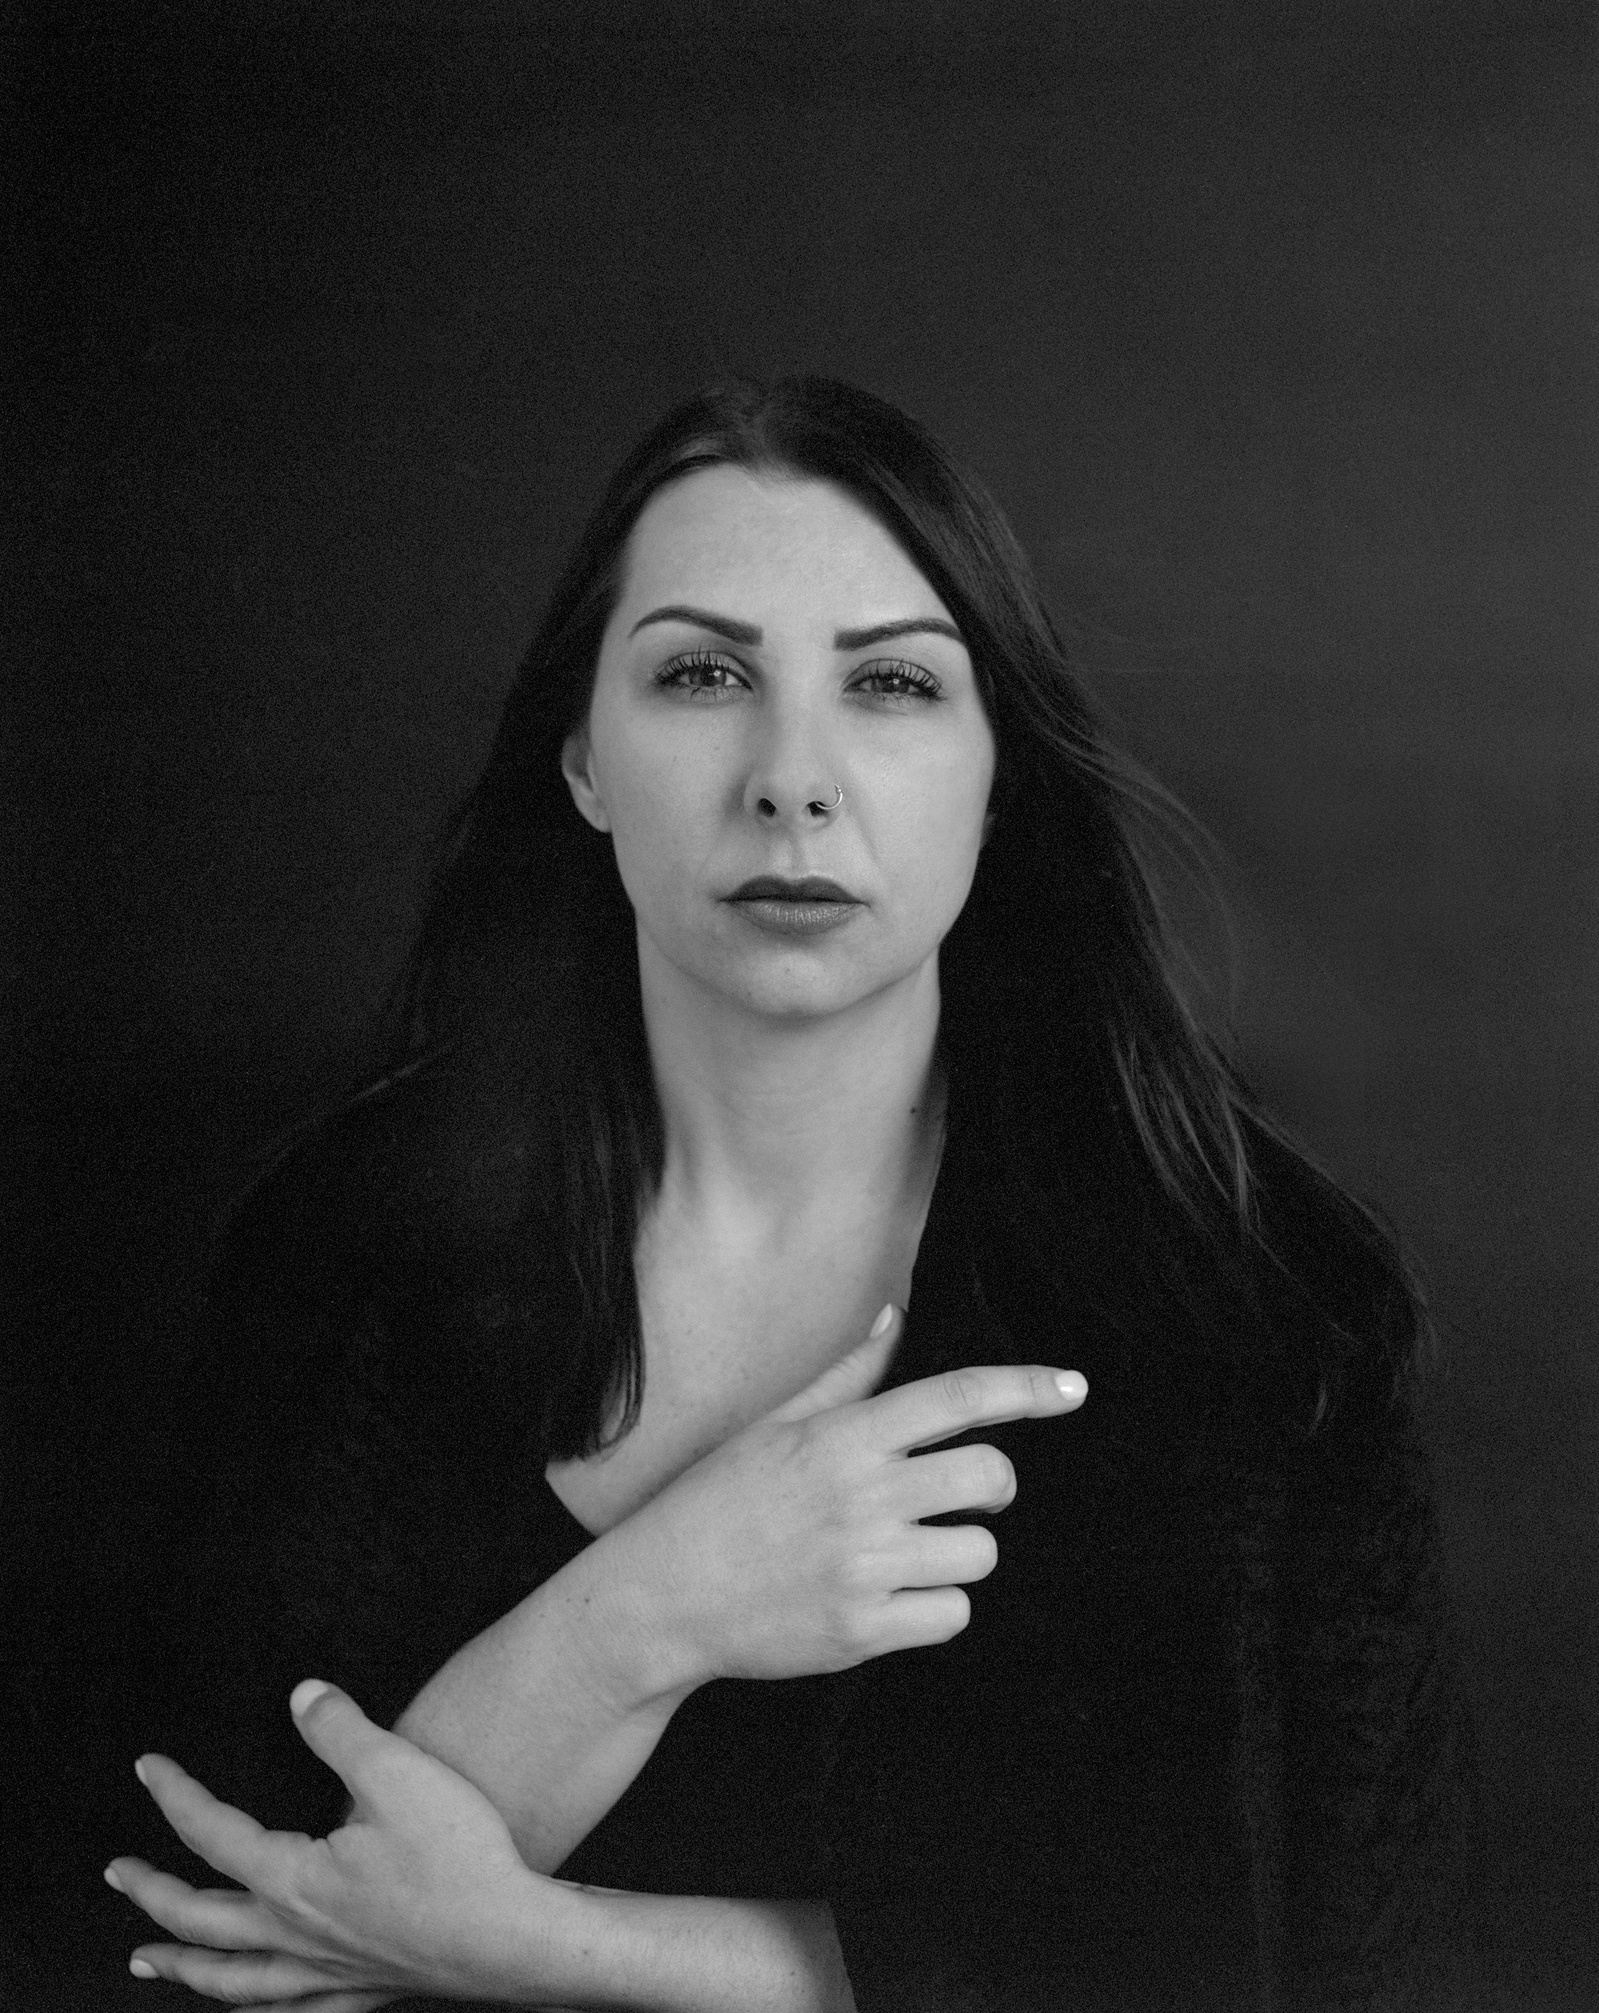 Contemporary black and white film portrait of a woman